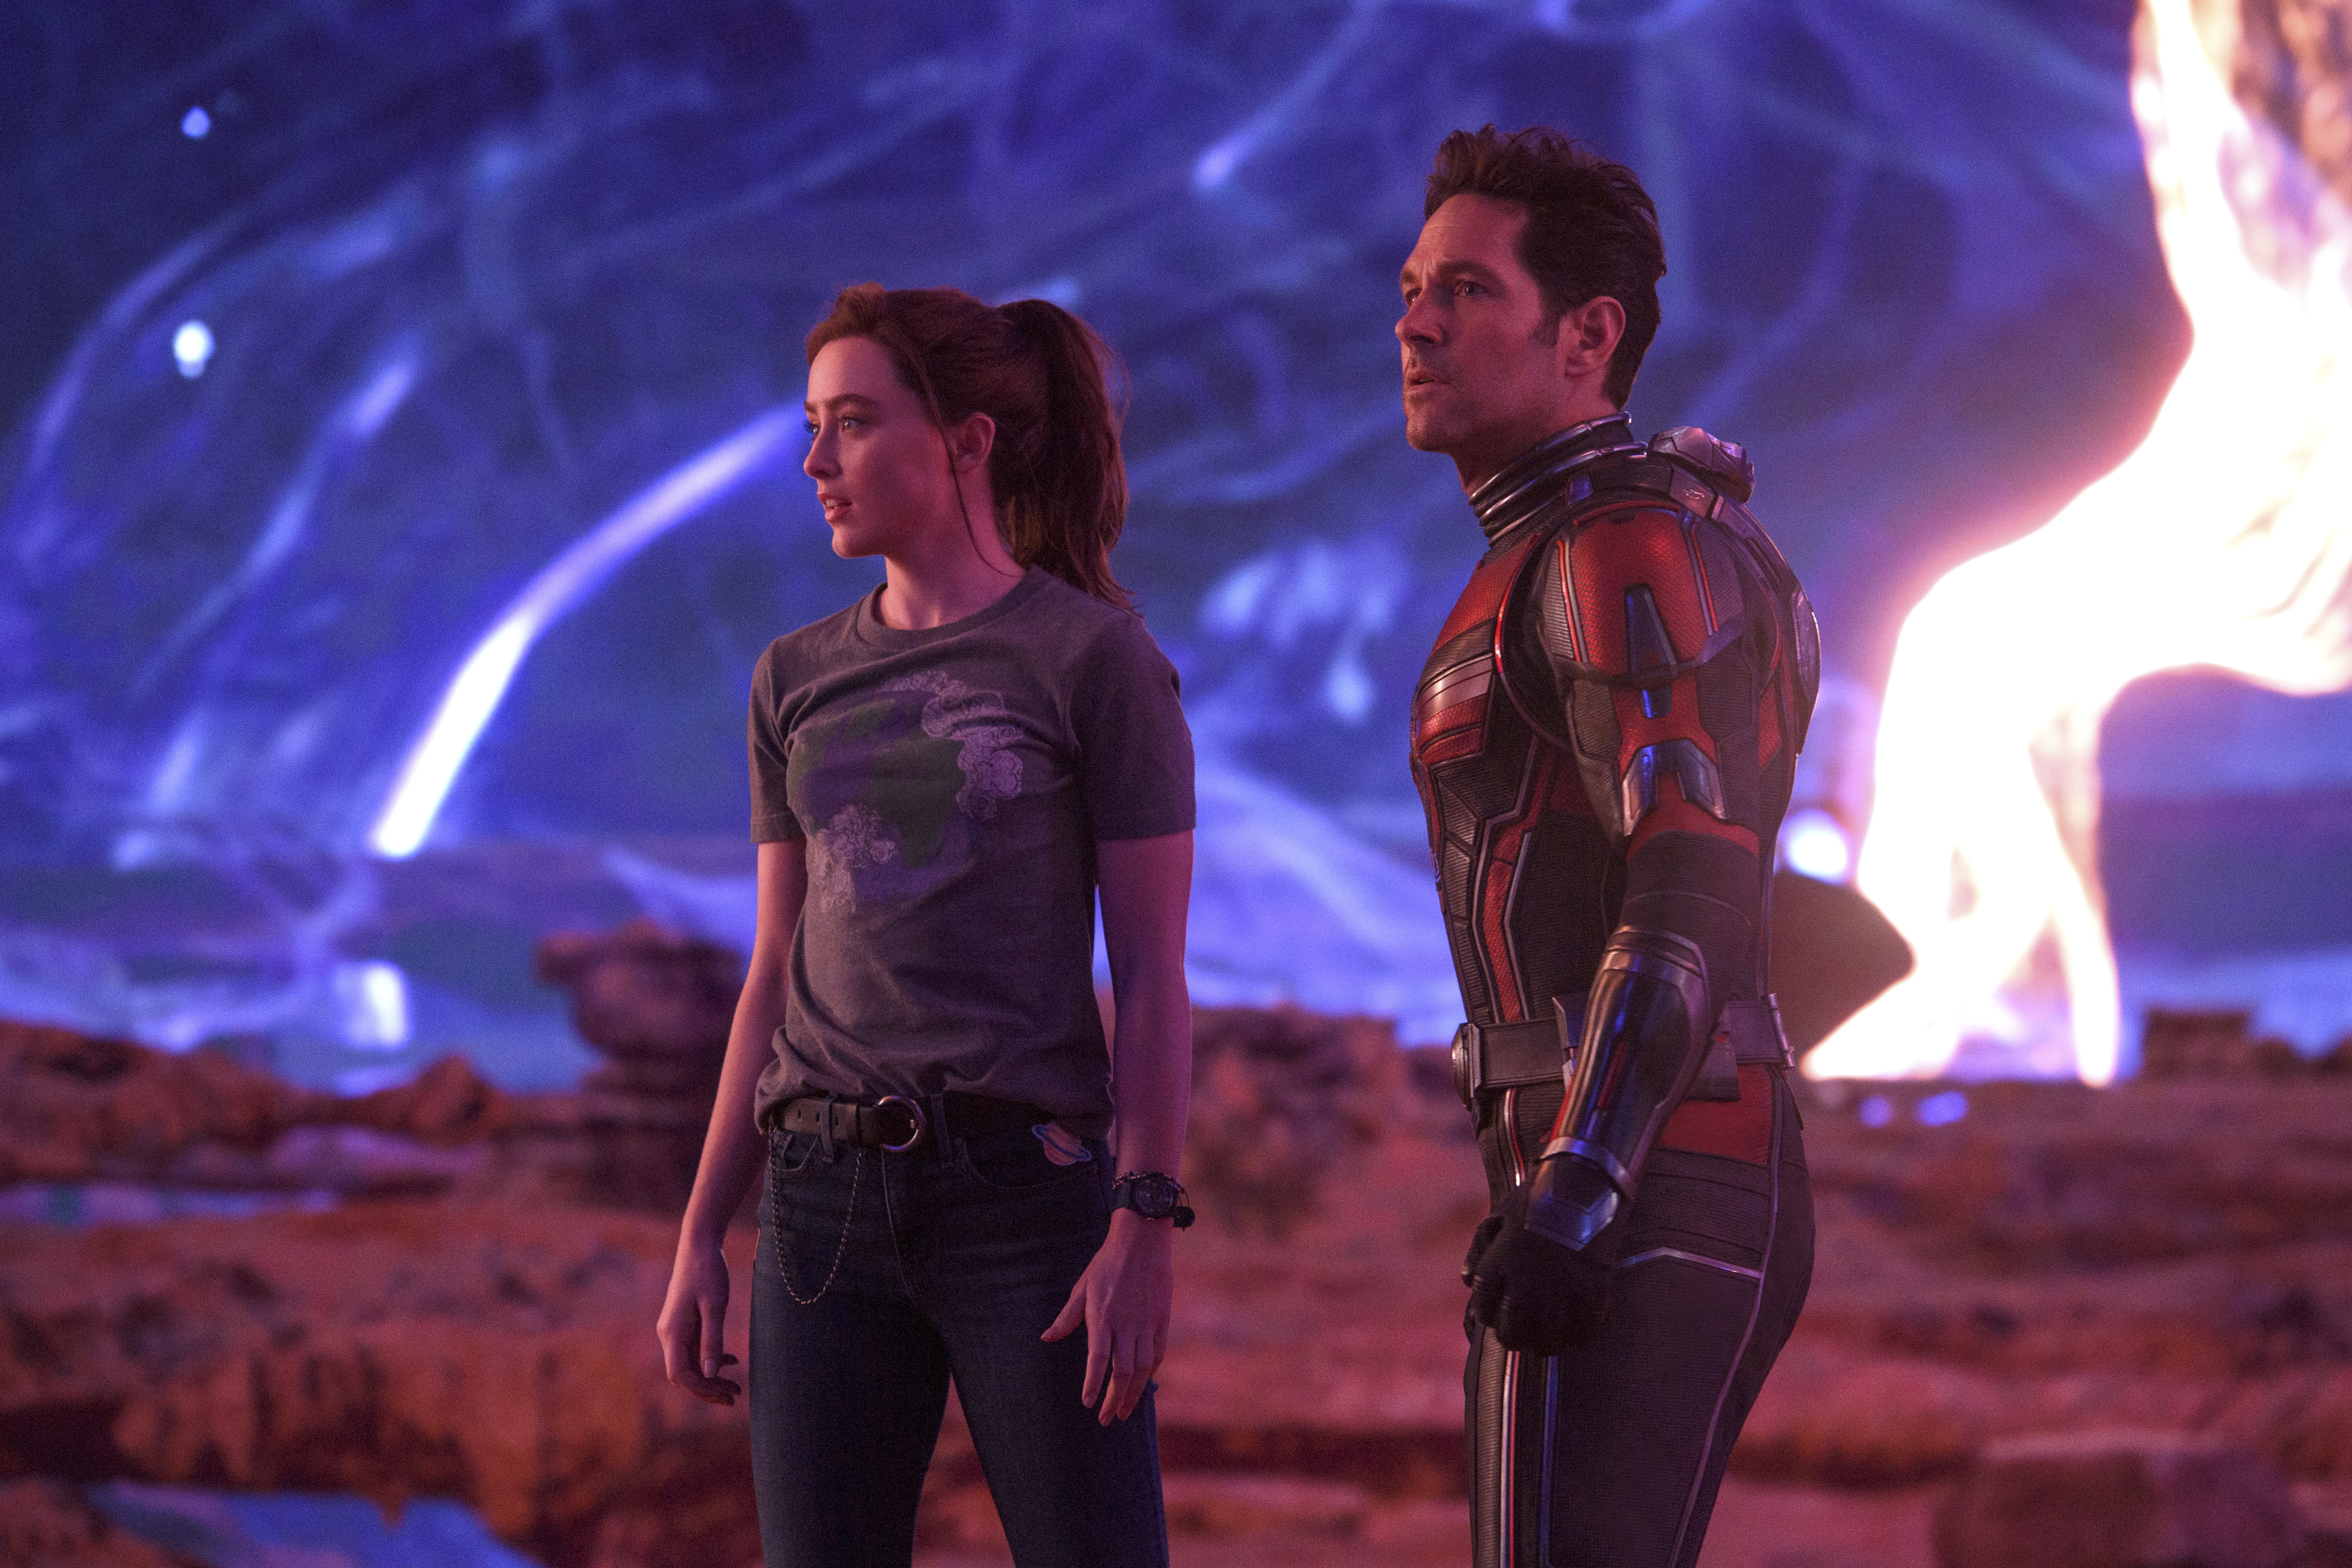 (L-R): Kathryn Newton as Cassandra “Cassie” Lang and Paul Rudd as Scott Lang/Ant-Man in Ant-Man and the Wasp: Quantumania. Cassie is in jeans and a t-shirt, while Scott is wearing his Ant-Man costume with the helmet off. They stand stunned on an alien vista with swirling skies.